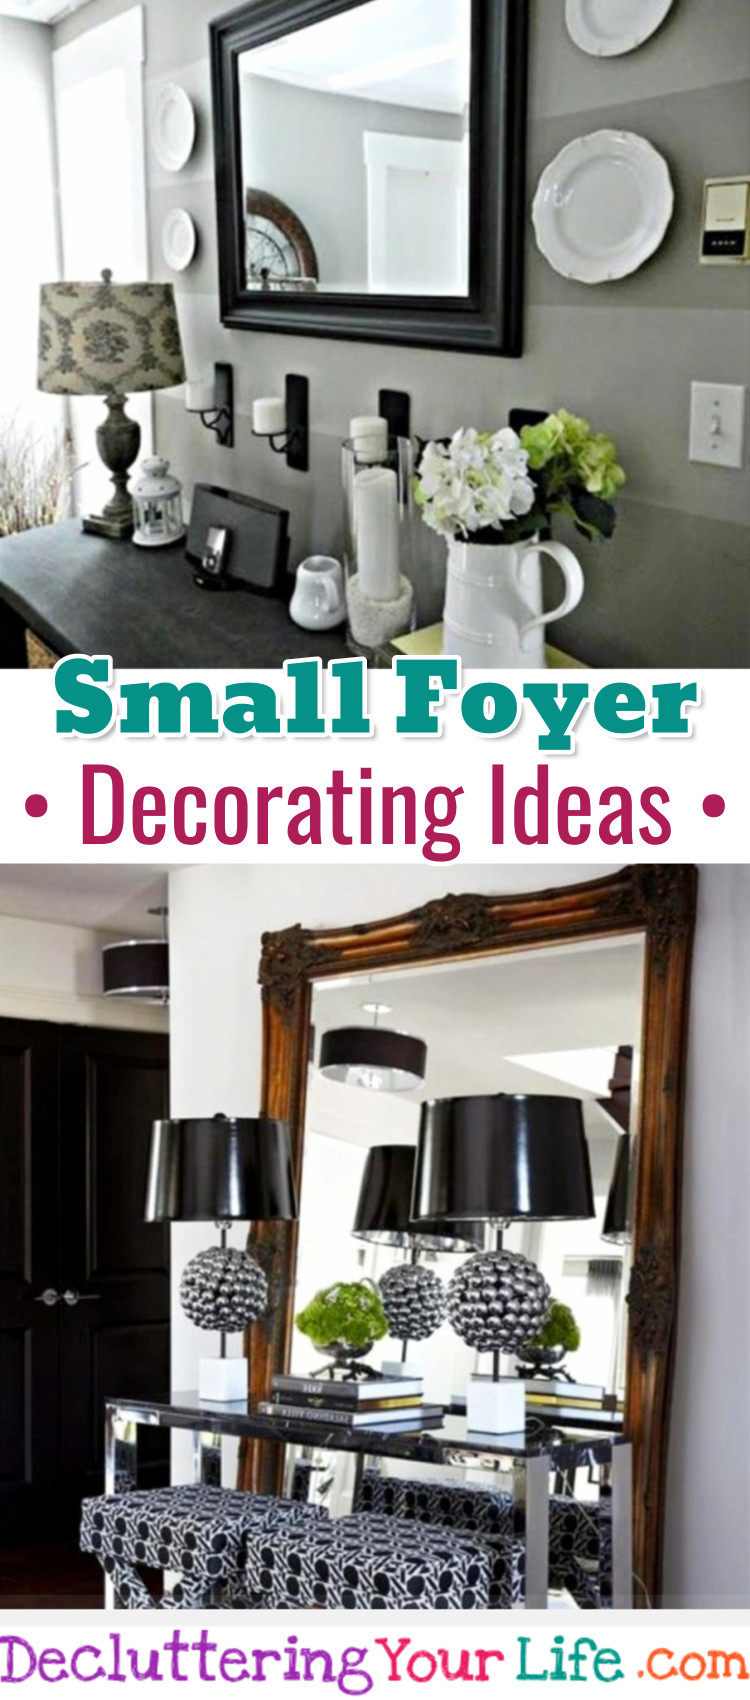 Small Foyer Decor Ideas - How To Decorate a Small Foyer or Entryway (even on a budget!) Foyer Decor Pictures Too